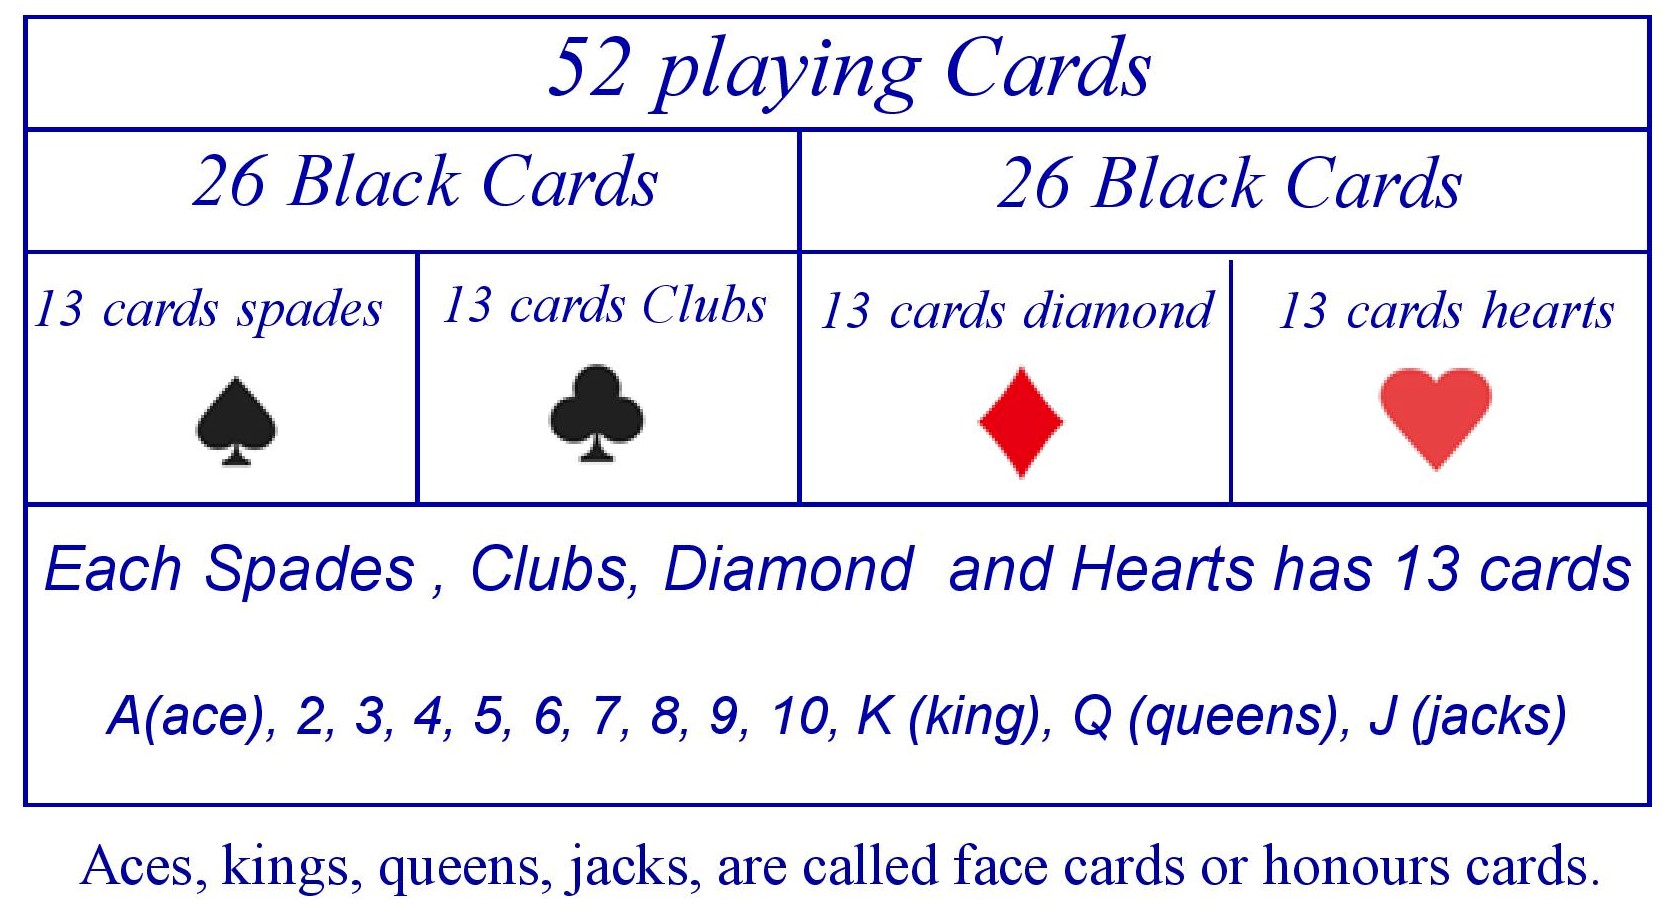 About Playing Cards